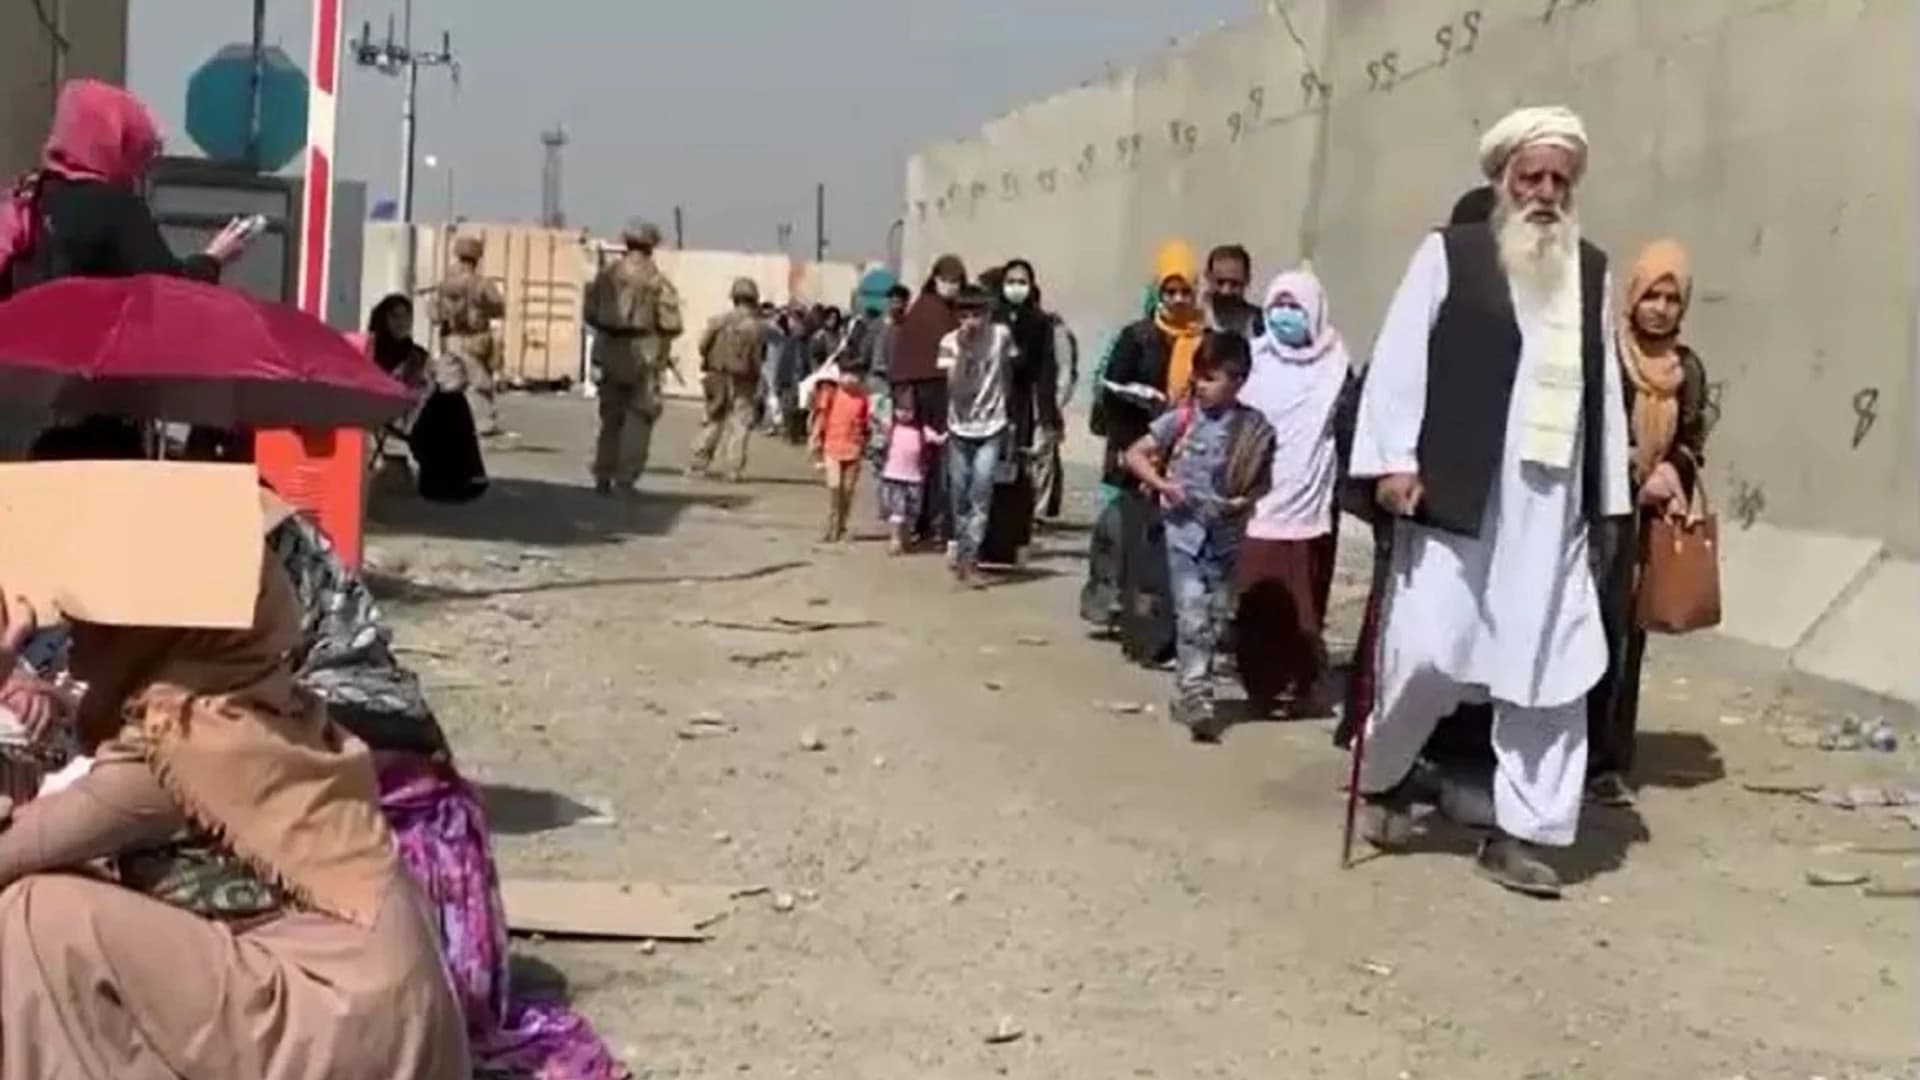 Gov. Murphy: Refugees from Afghanistan being screened for health and security